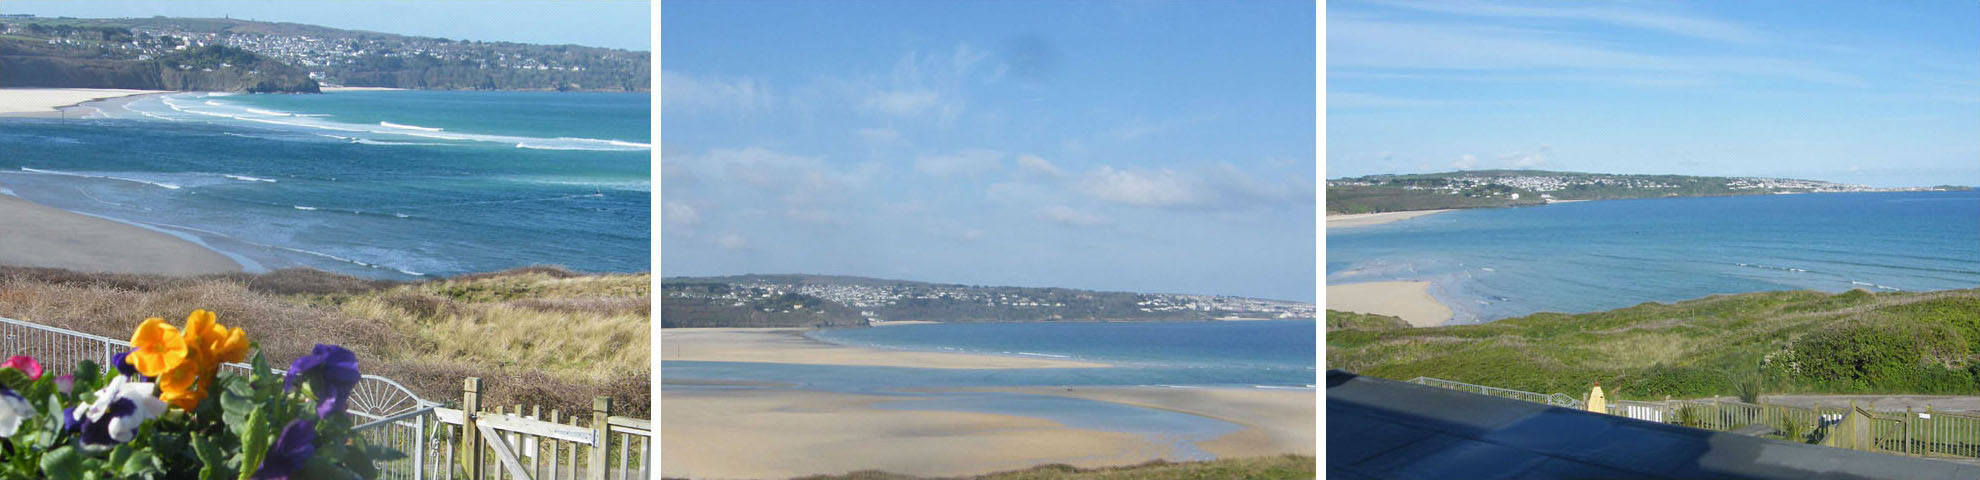 Local Area St Ives Bay and Hayle